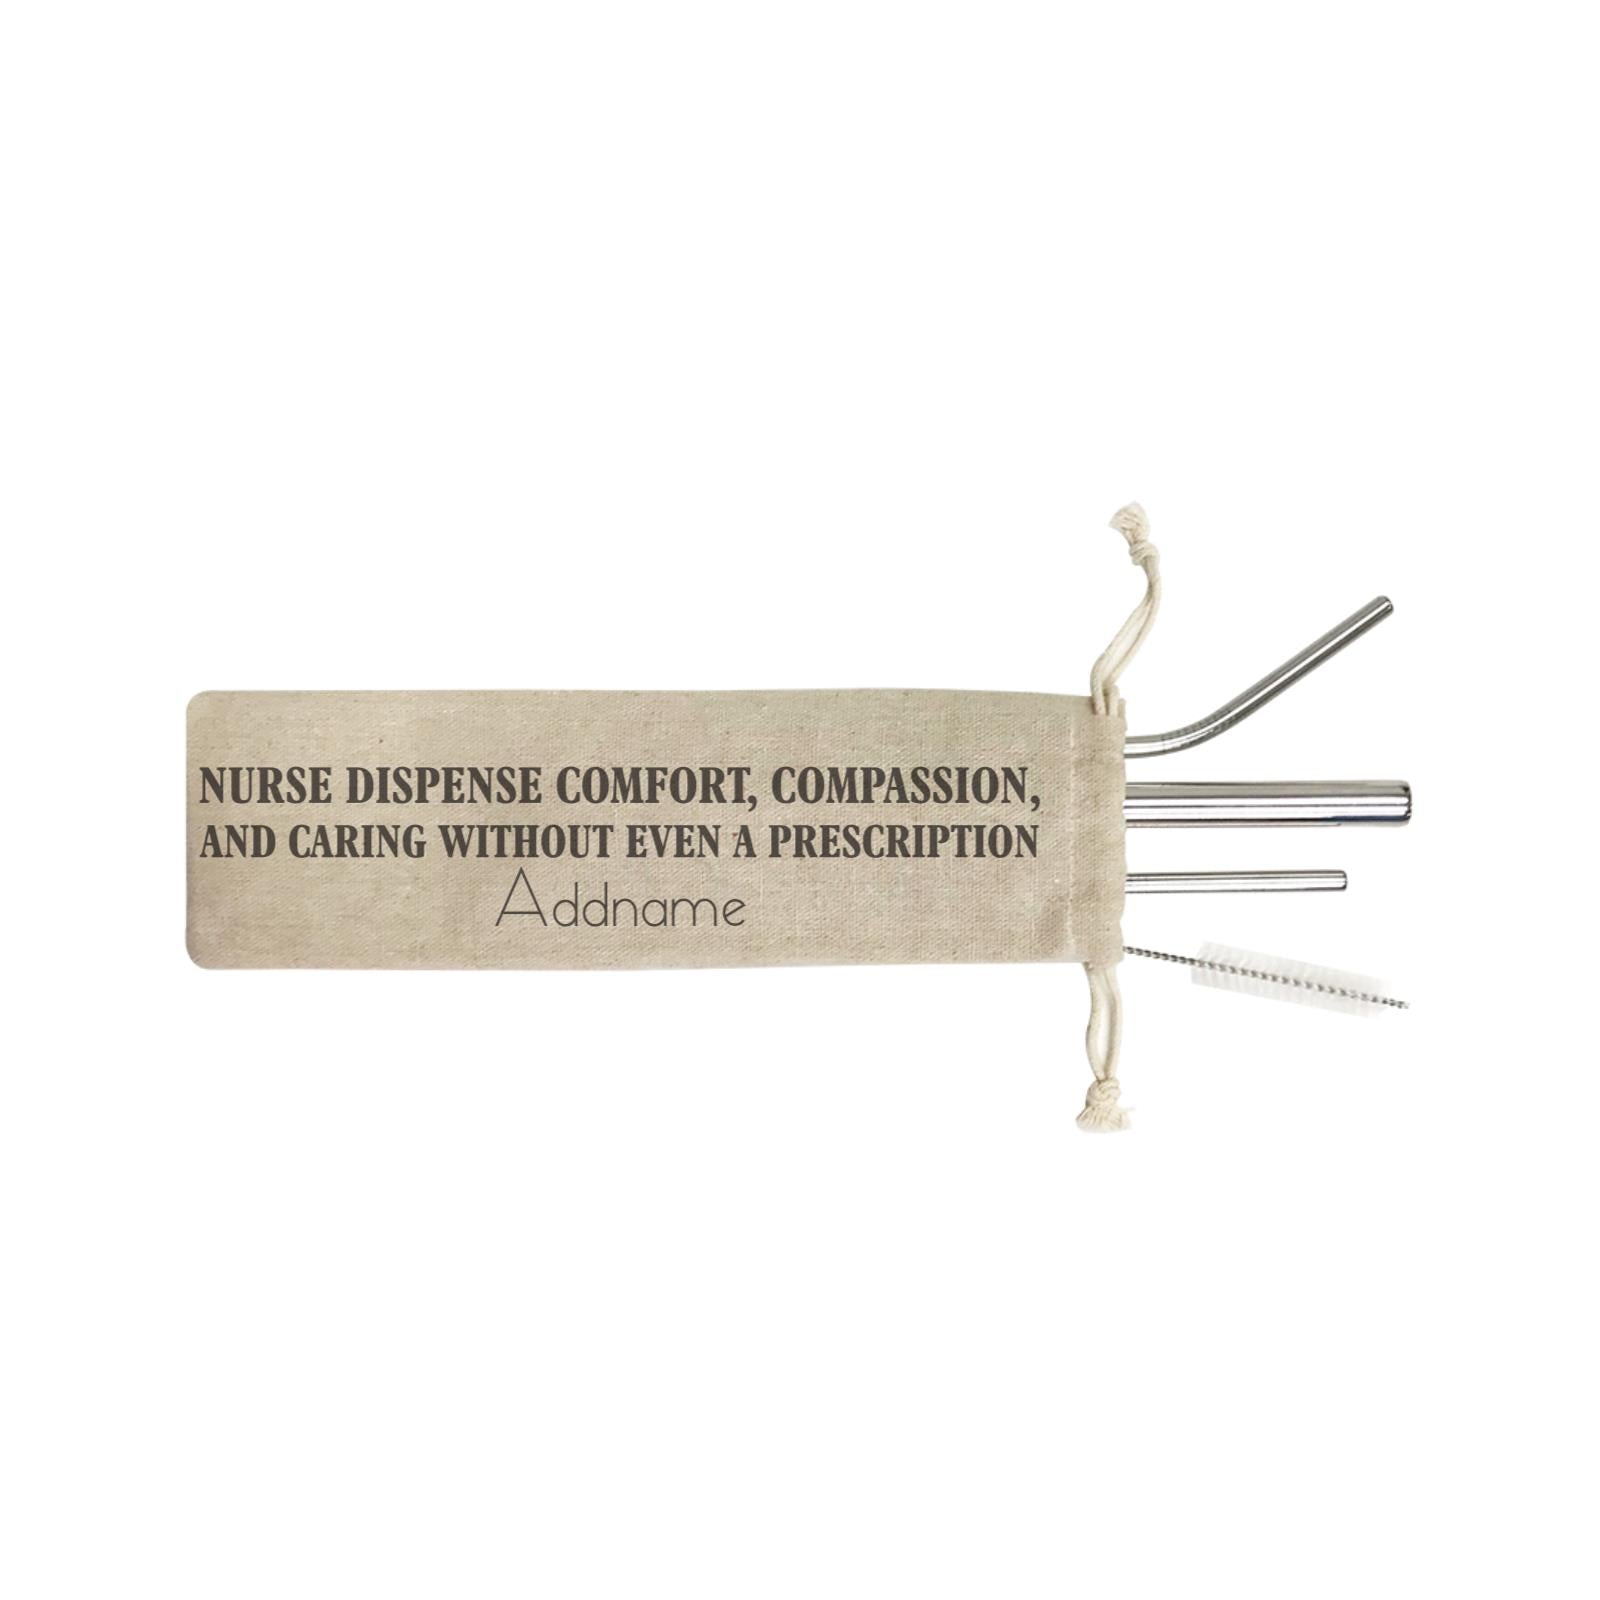 Nurse Dispense Comfort, Compassion, And Caring Without Even A Prescription SB 4-in-1 Stainless Steel Straw Set In a Satchel